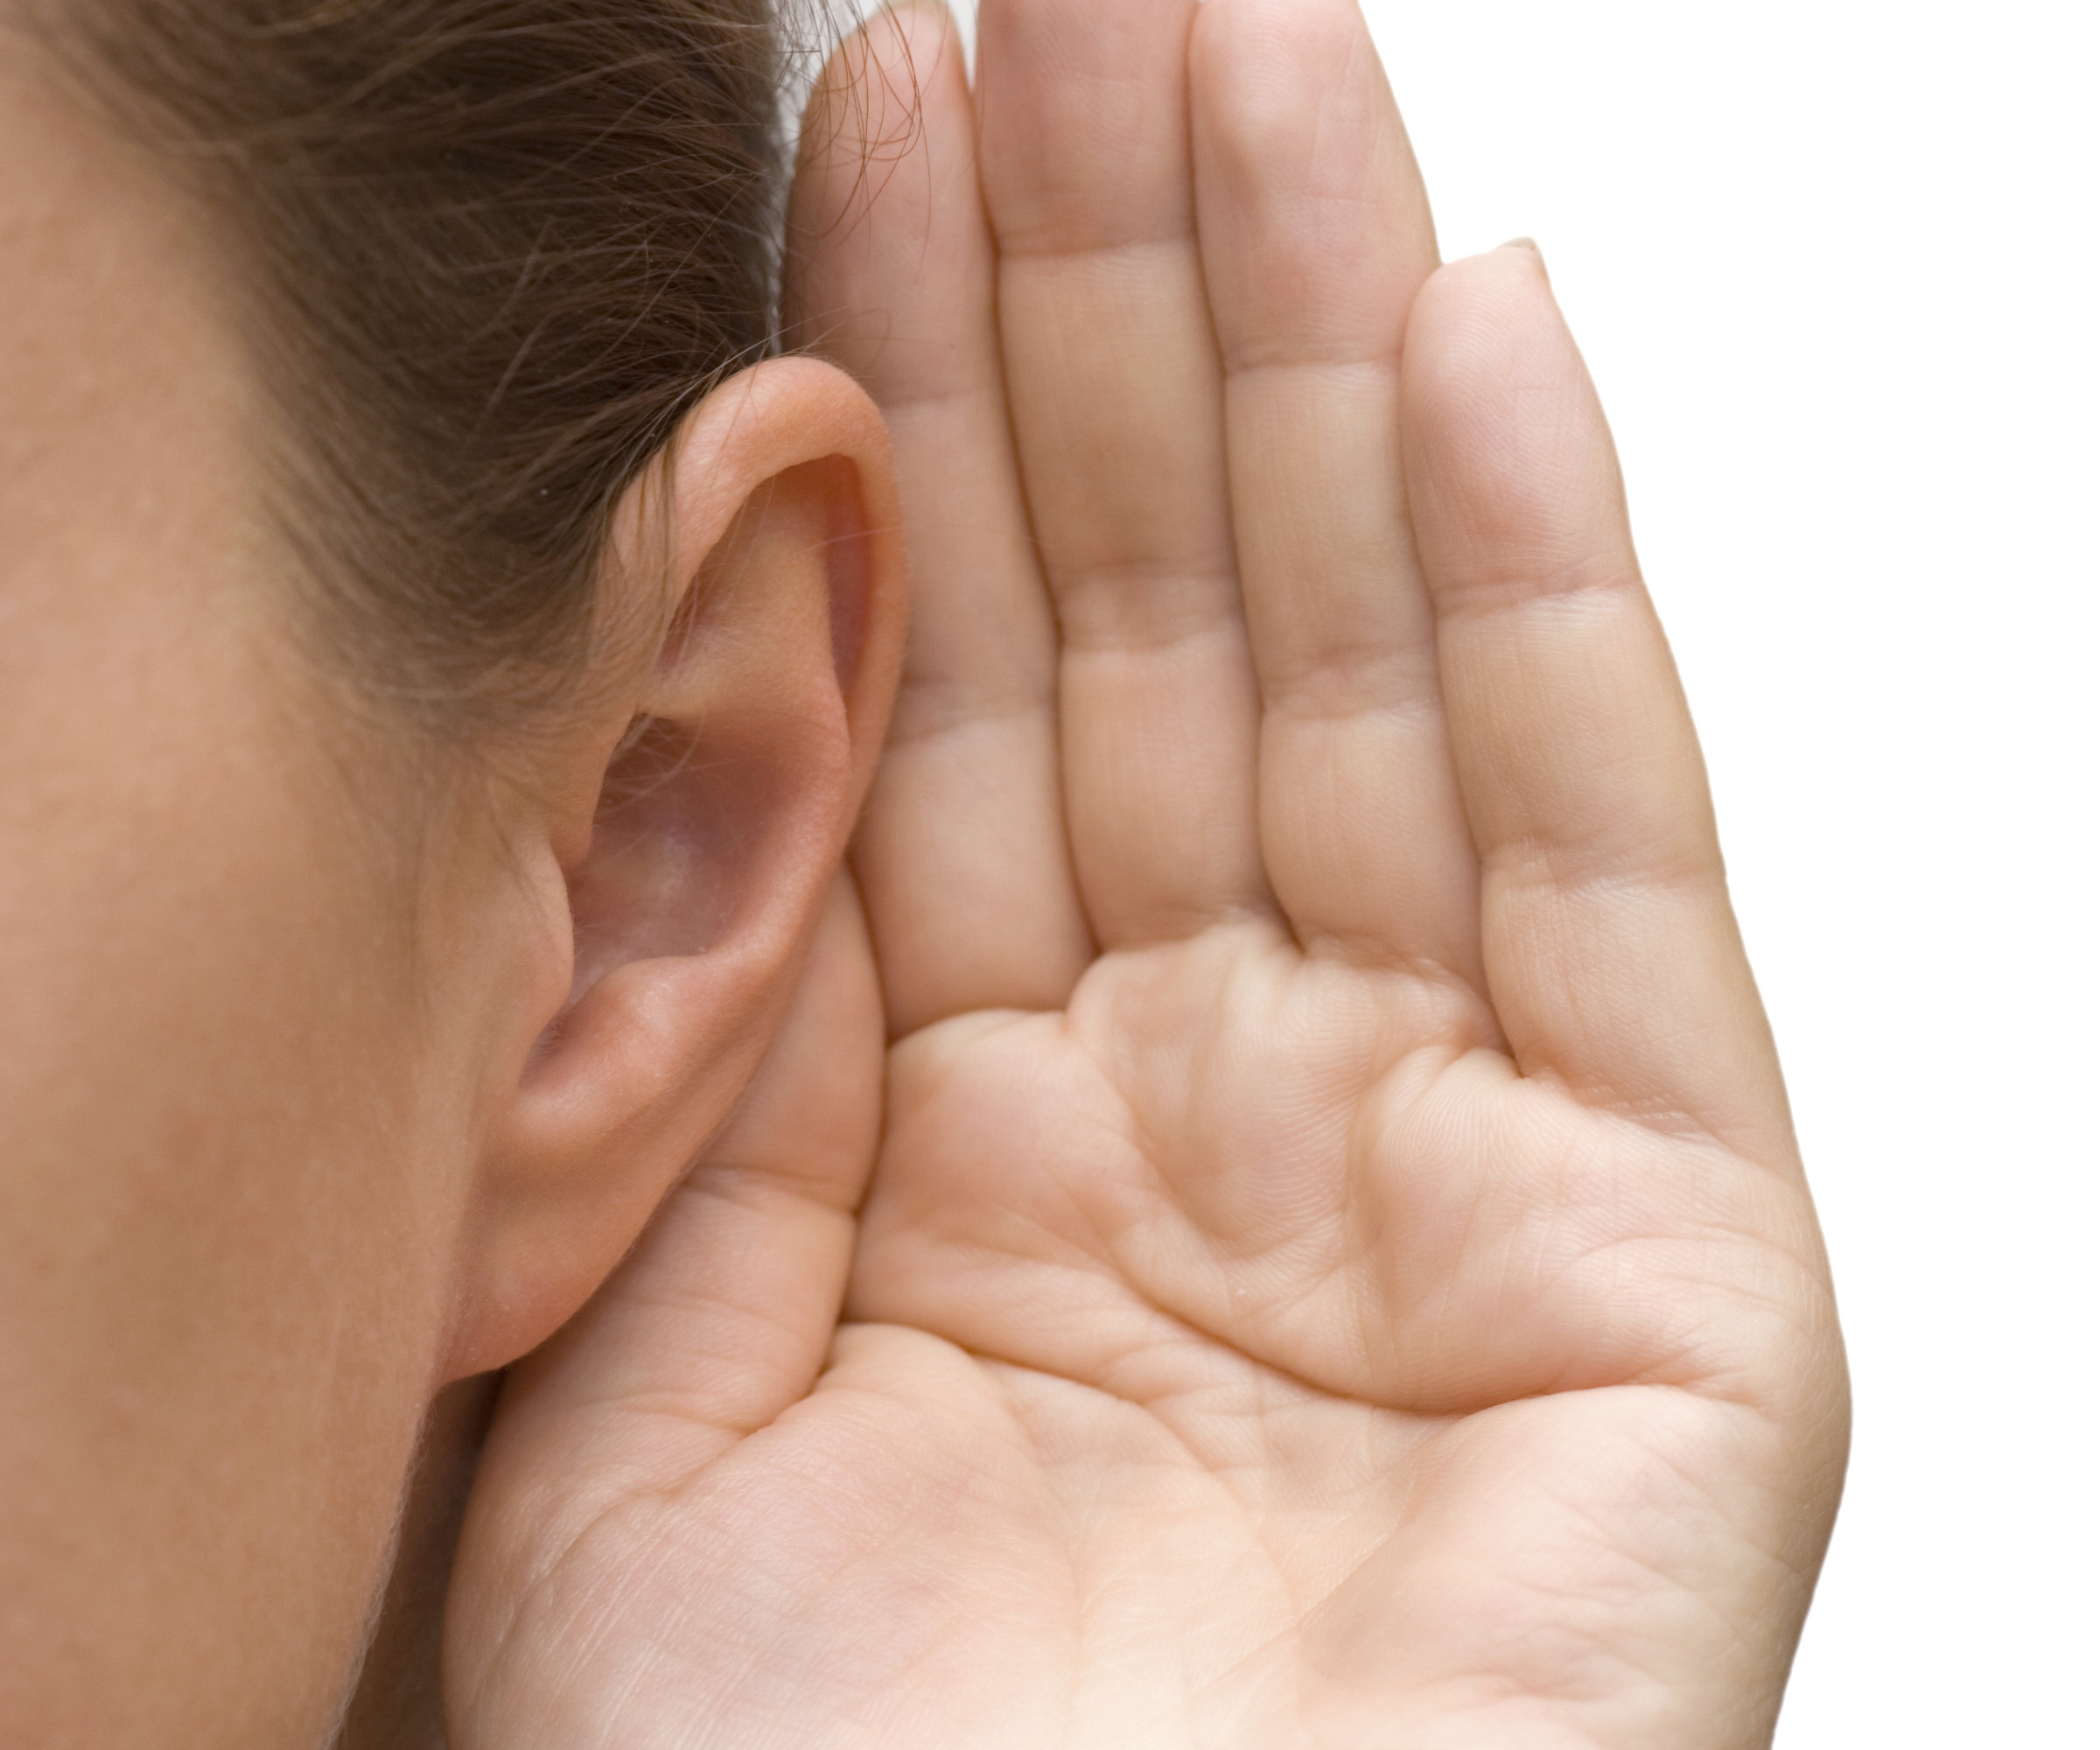 This hearing test determines how old you are